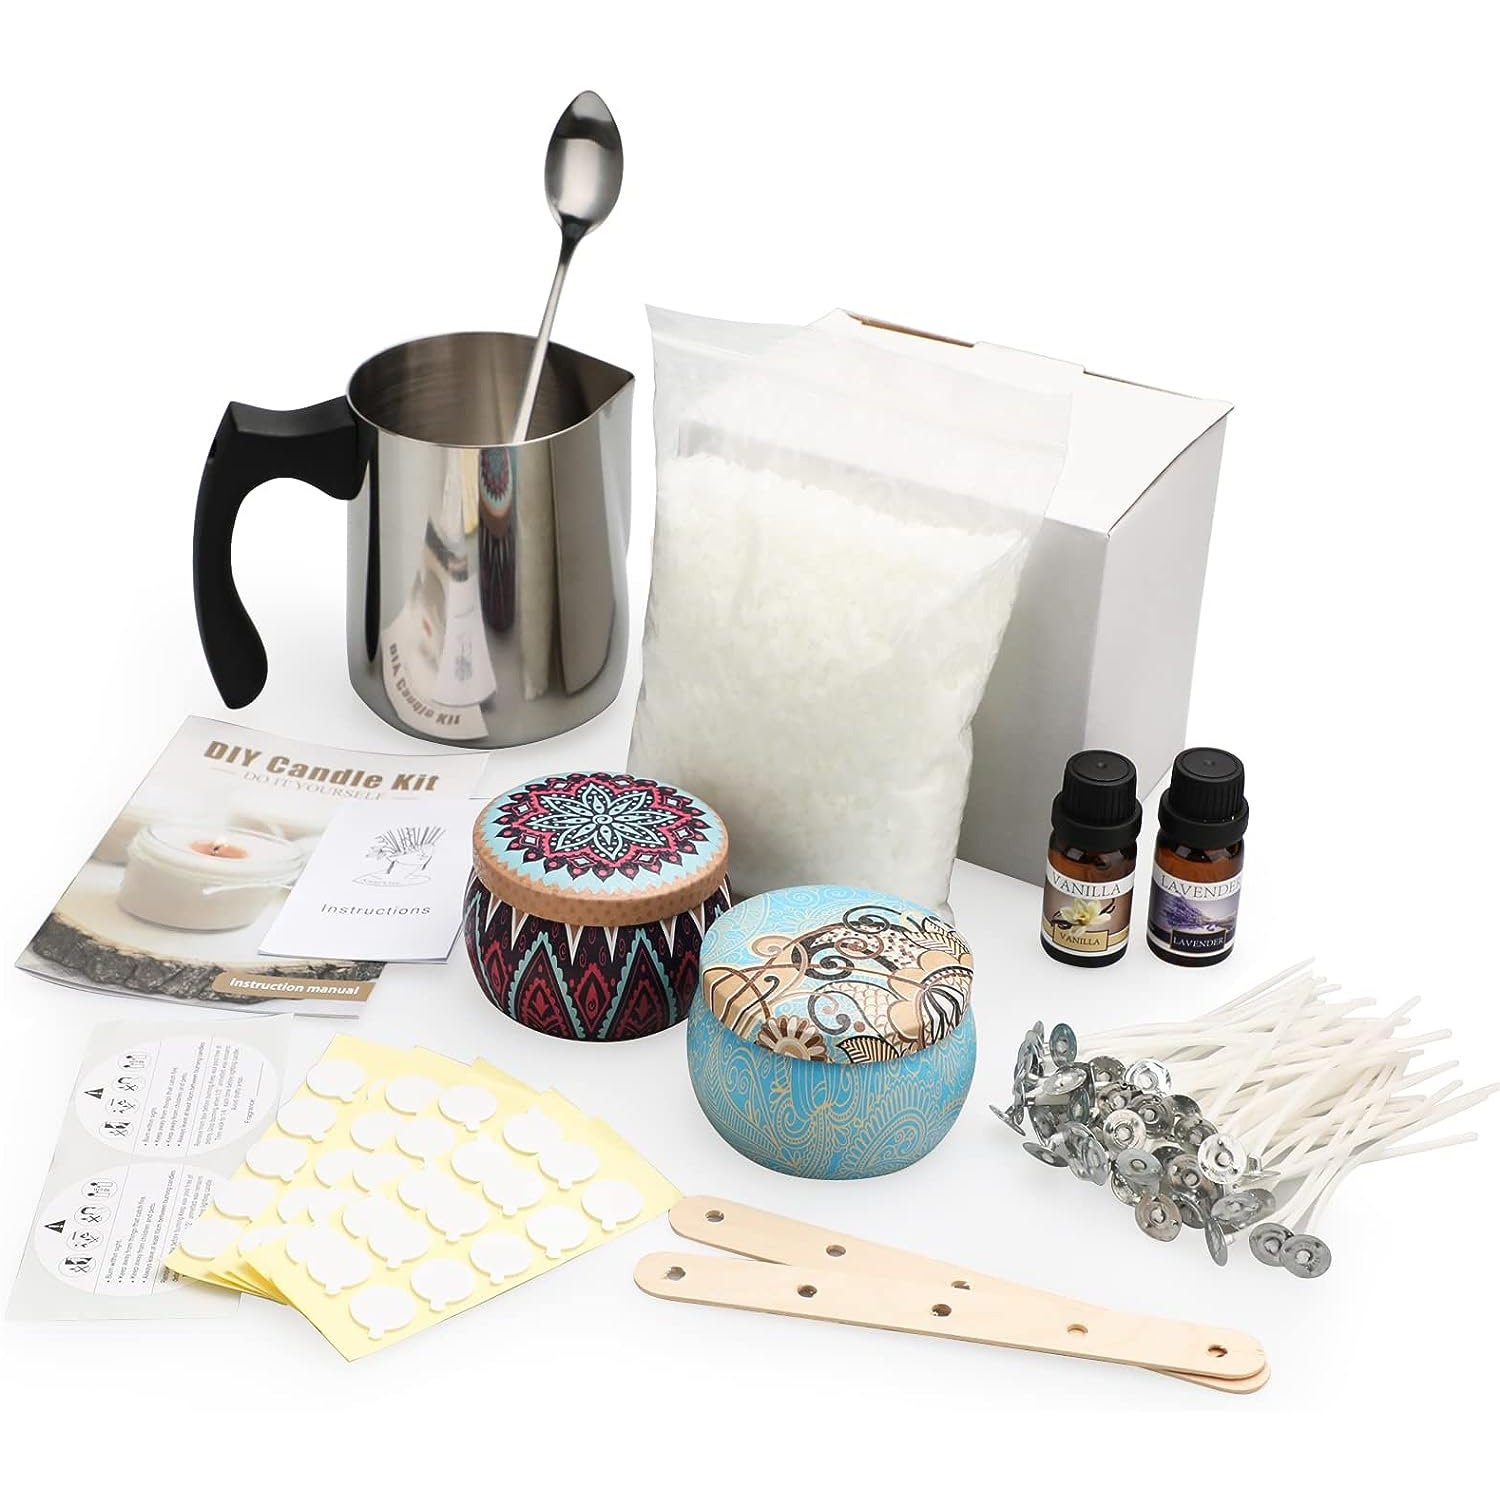 DIY Candle Making Kit for Adults & Teens, Beeswax Candle Making Kit Supplies